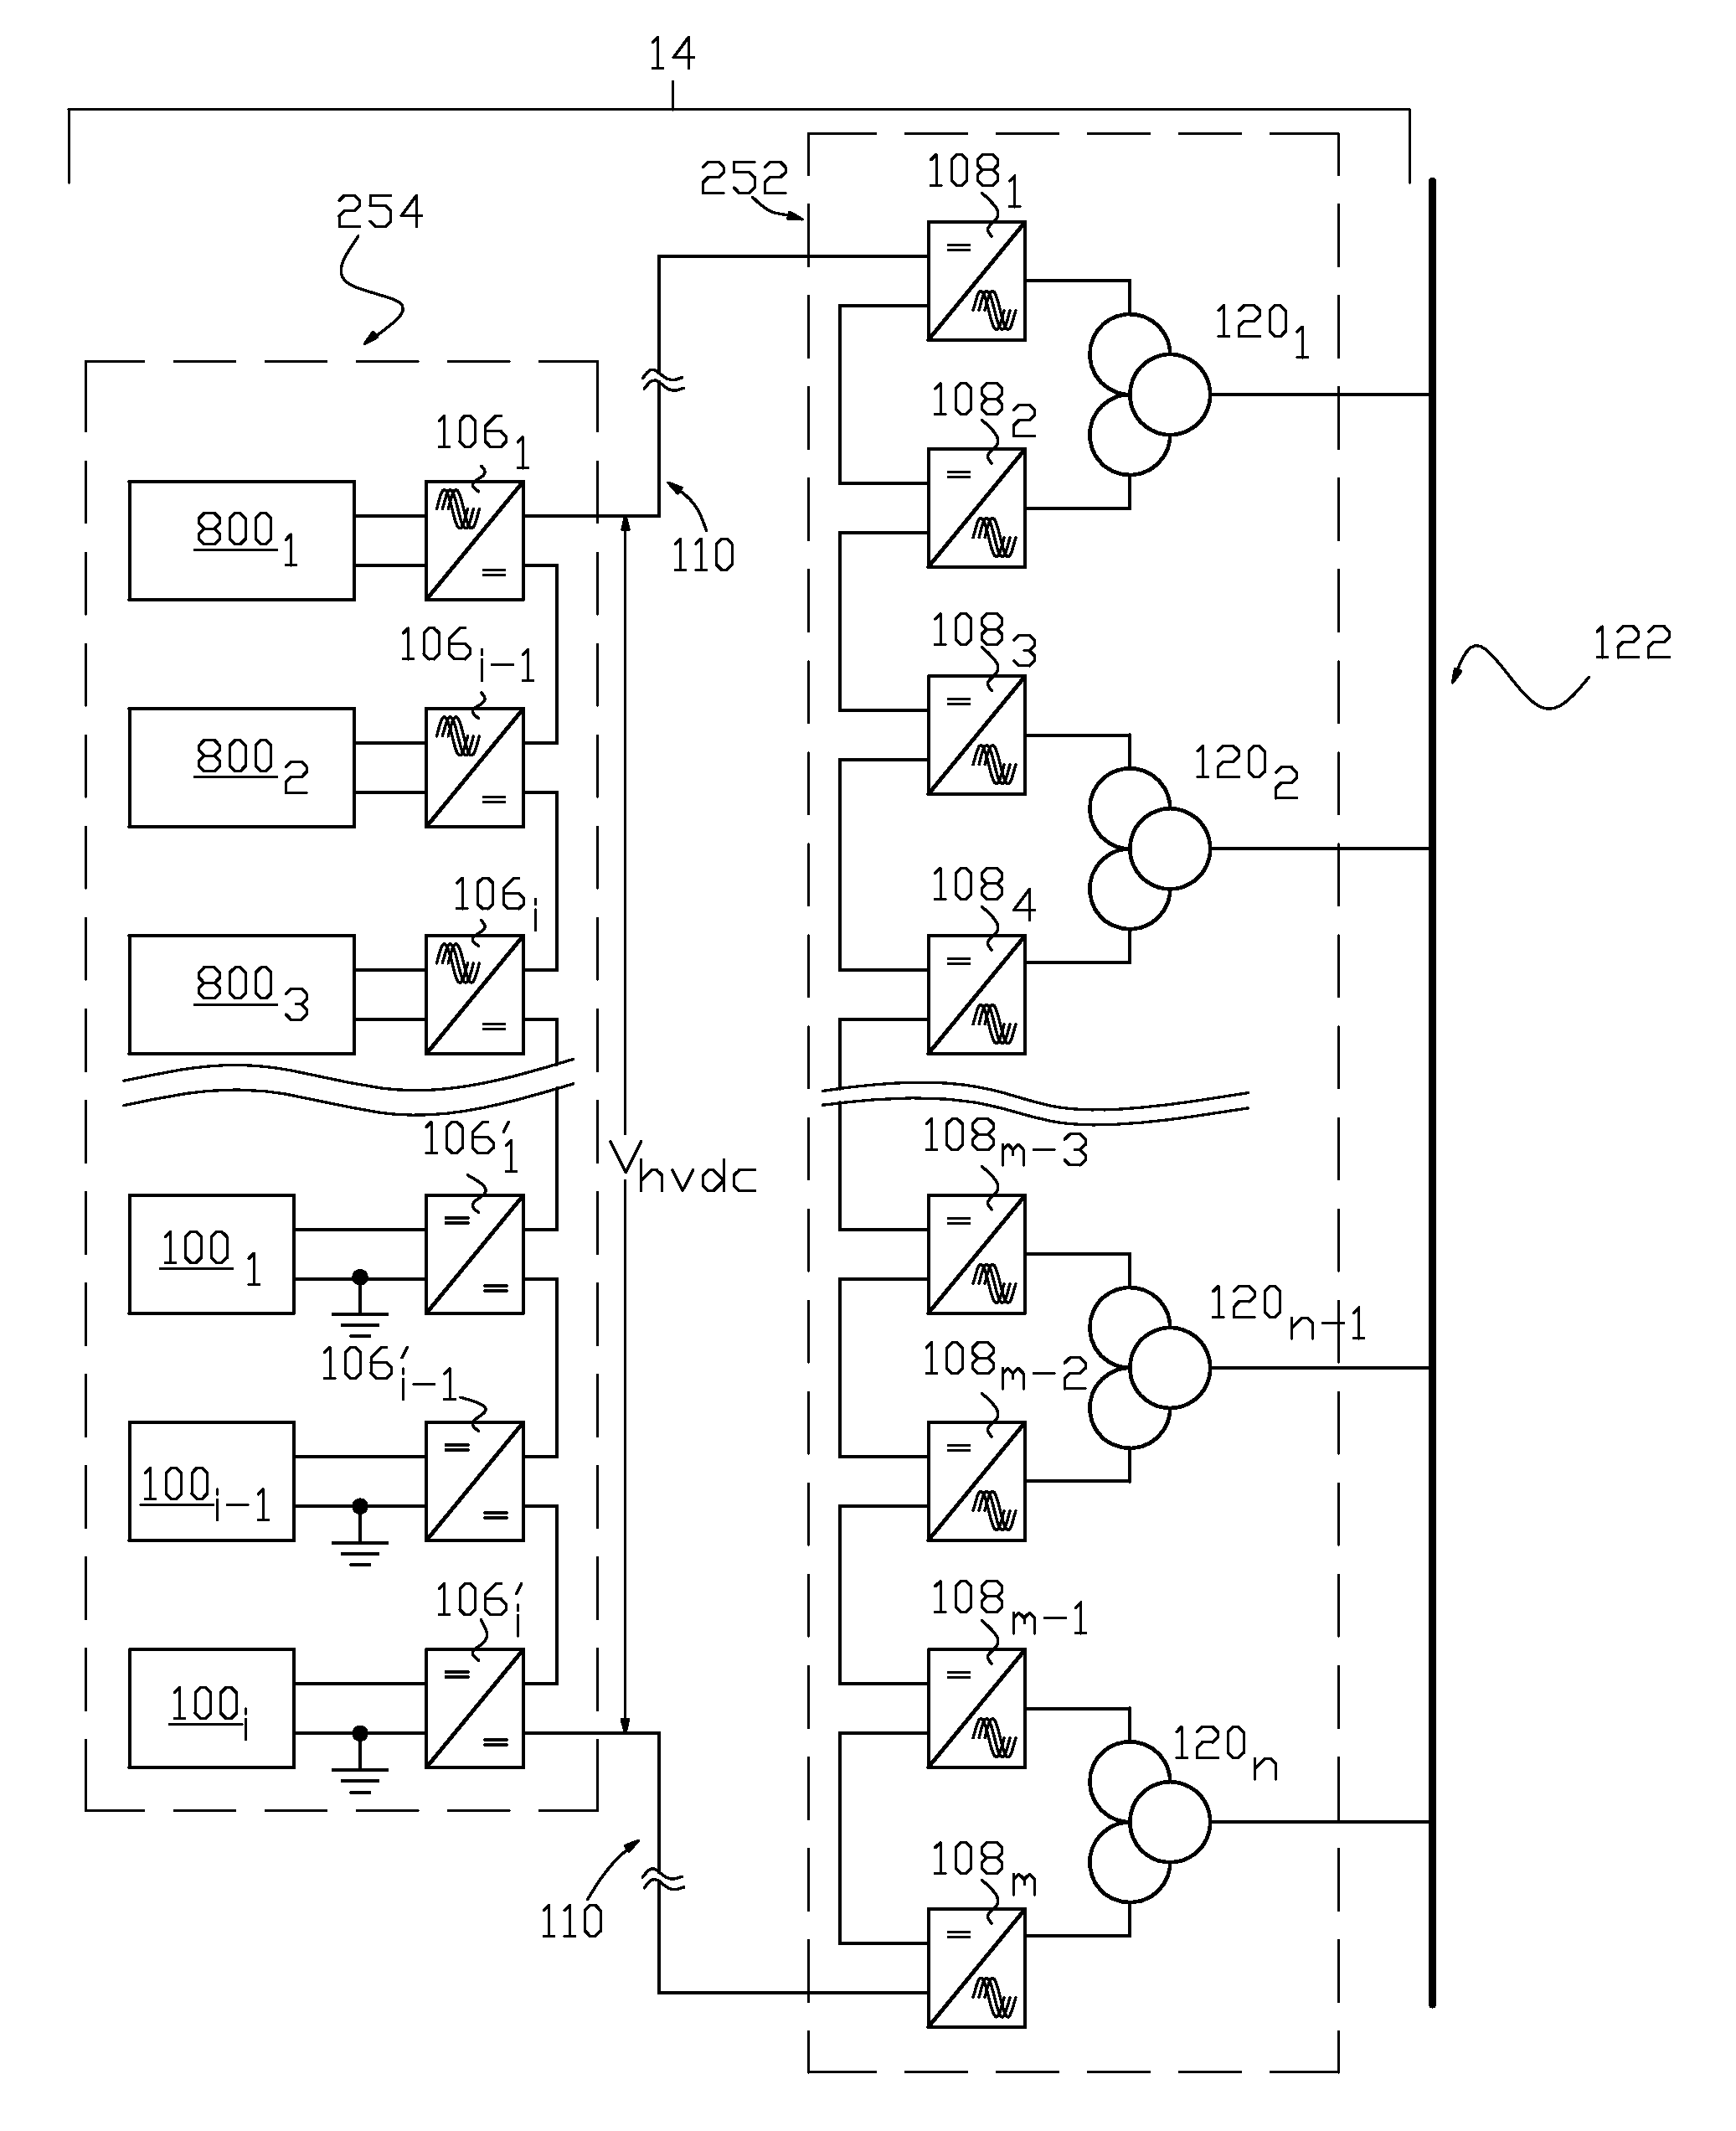 Collection of electric power from renewable energy sources via high voltage, direct current systems with conversion and supply to an alternating current transmission network